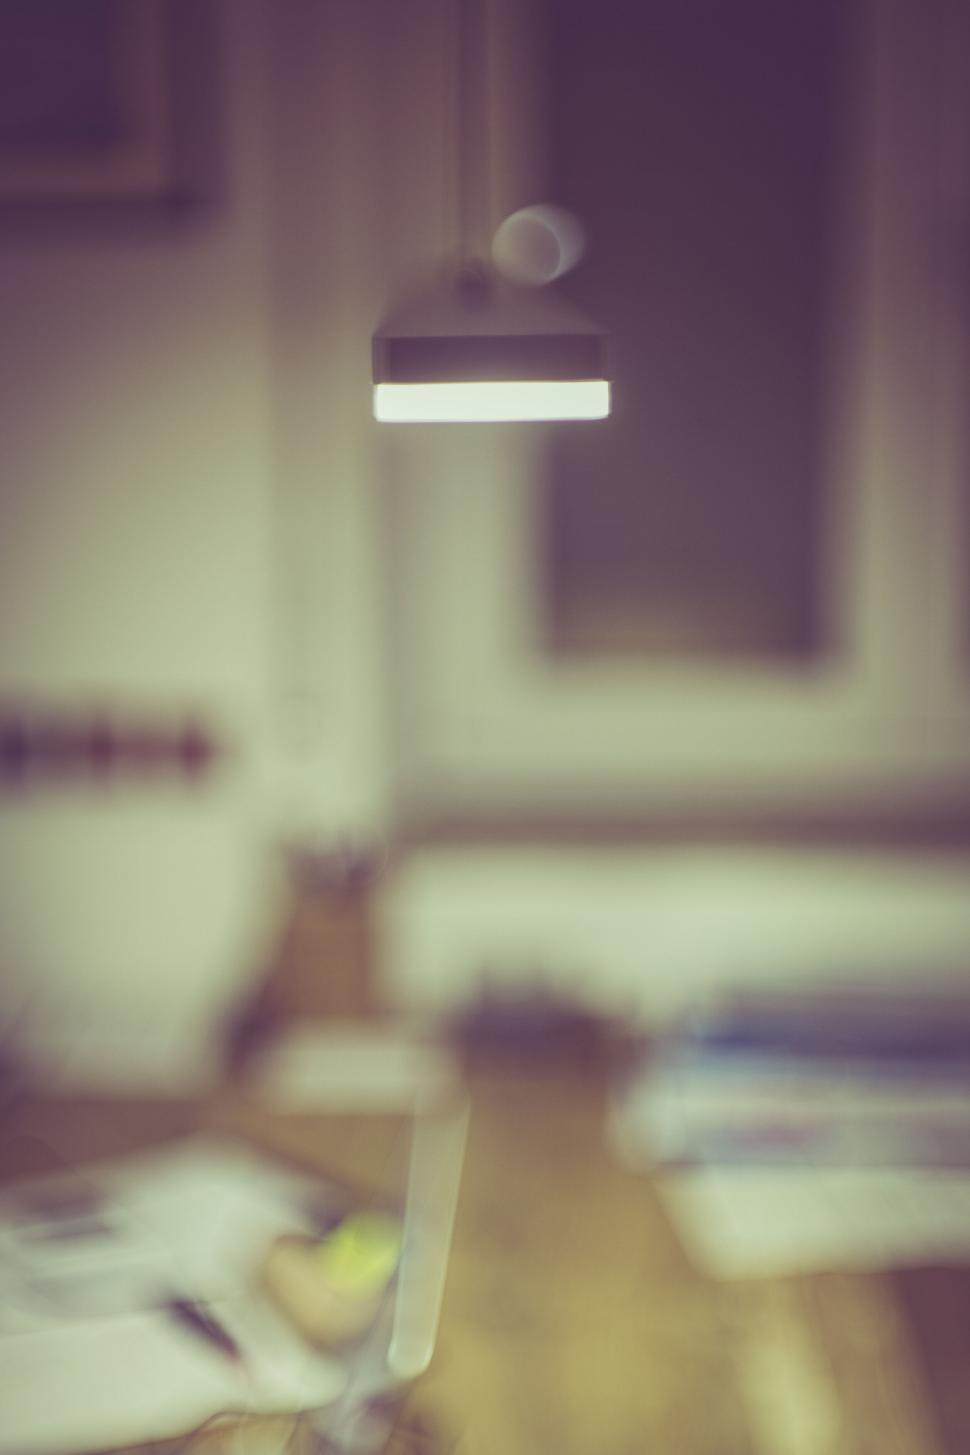 Free Image of Blurred image of a modern home office setup 